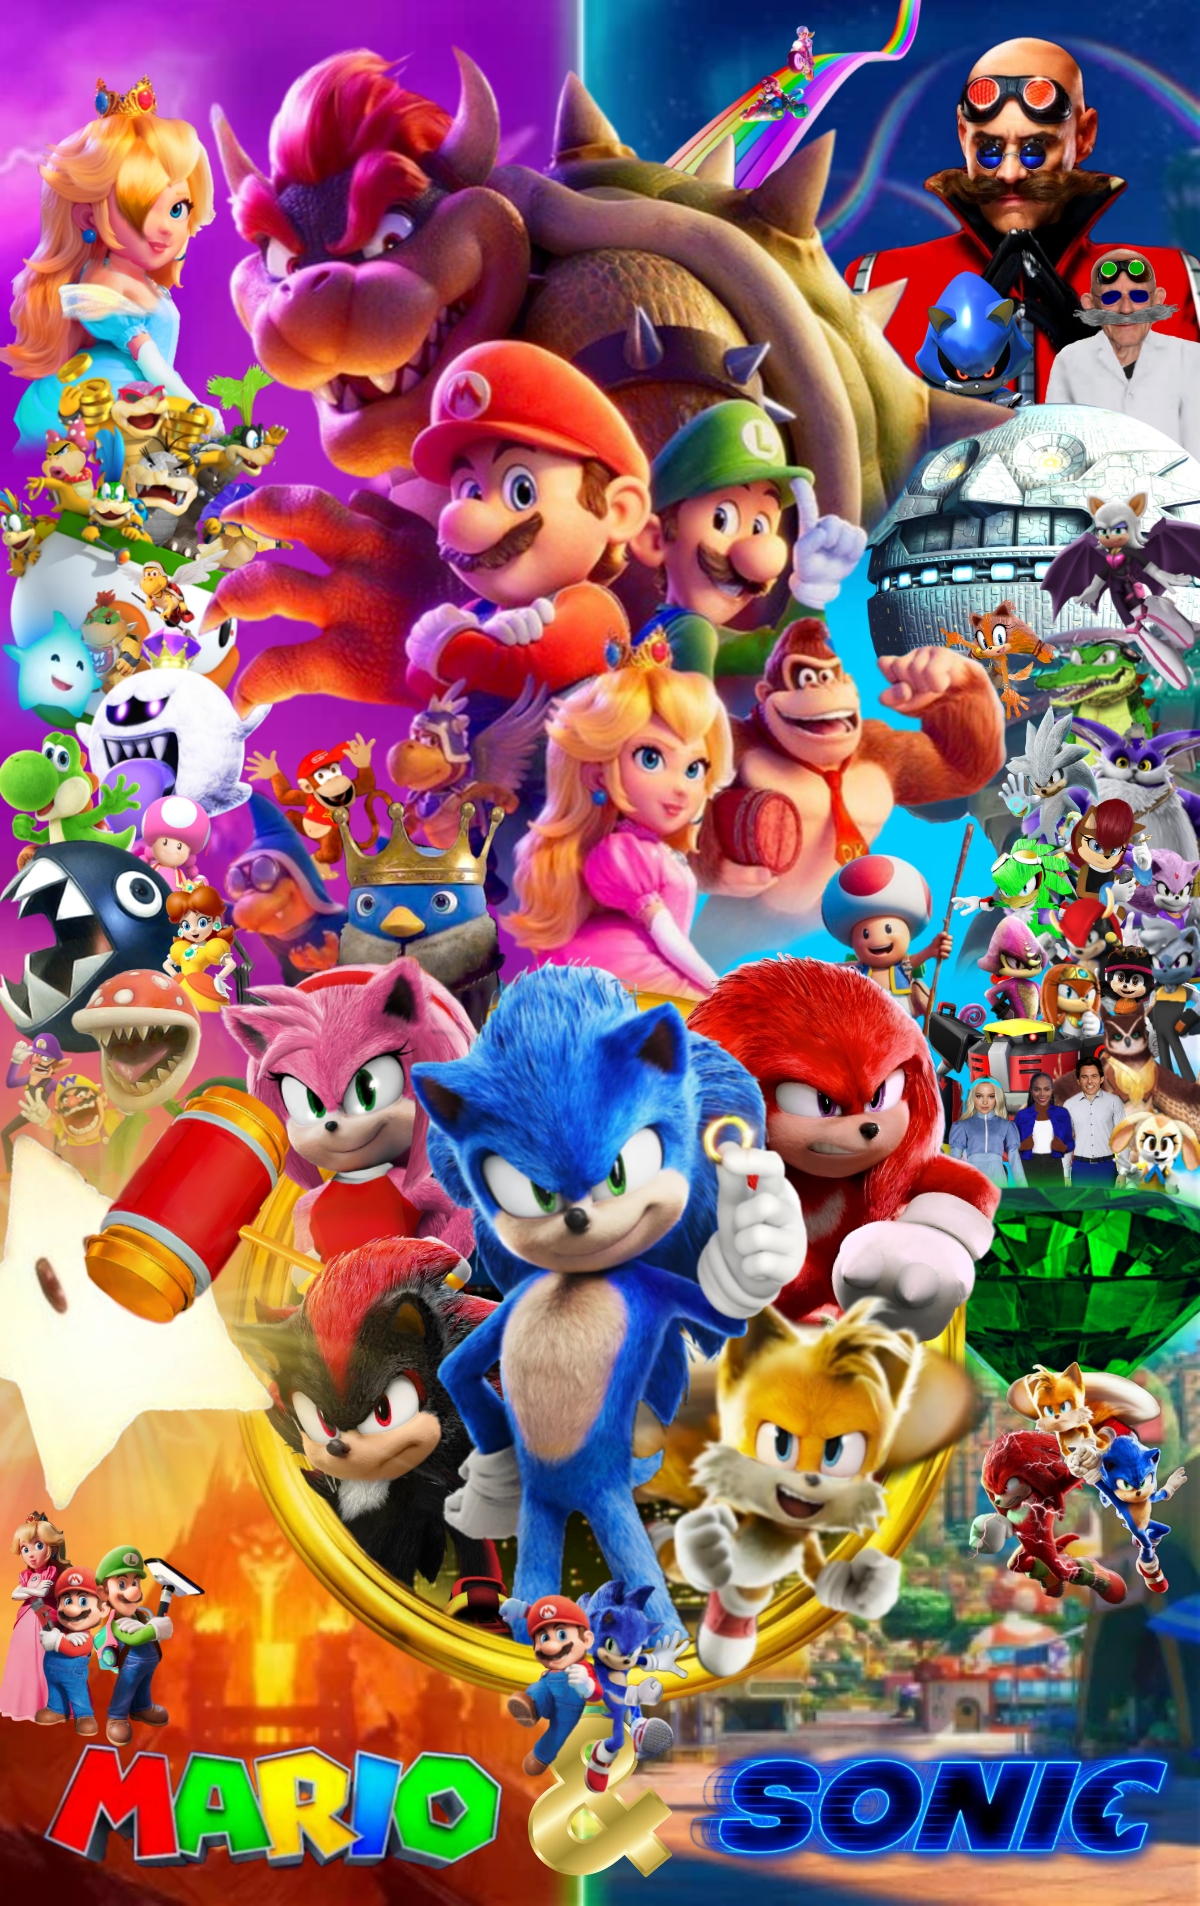 Sonic The Hedgehog 5 fanmade poster by Nikisawesom on DeviantArt